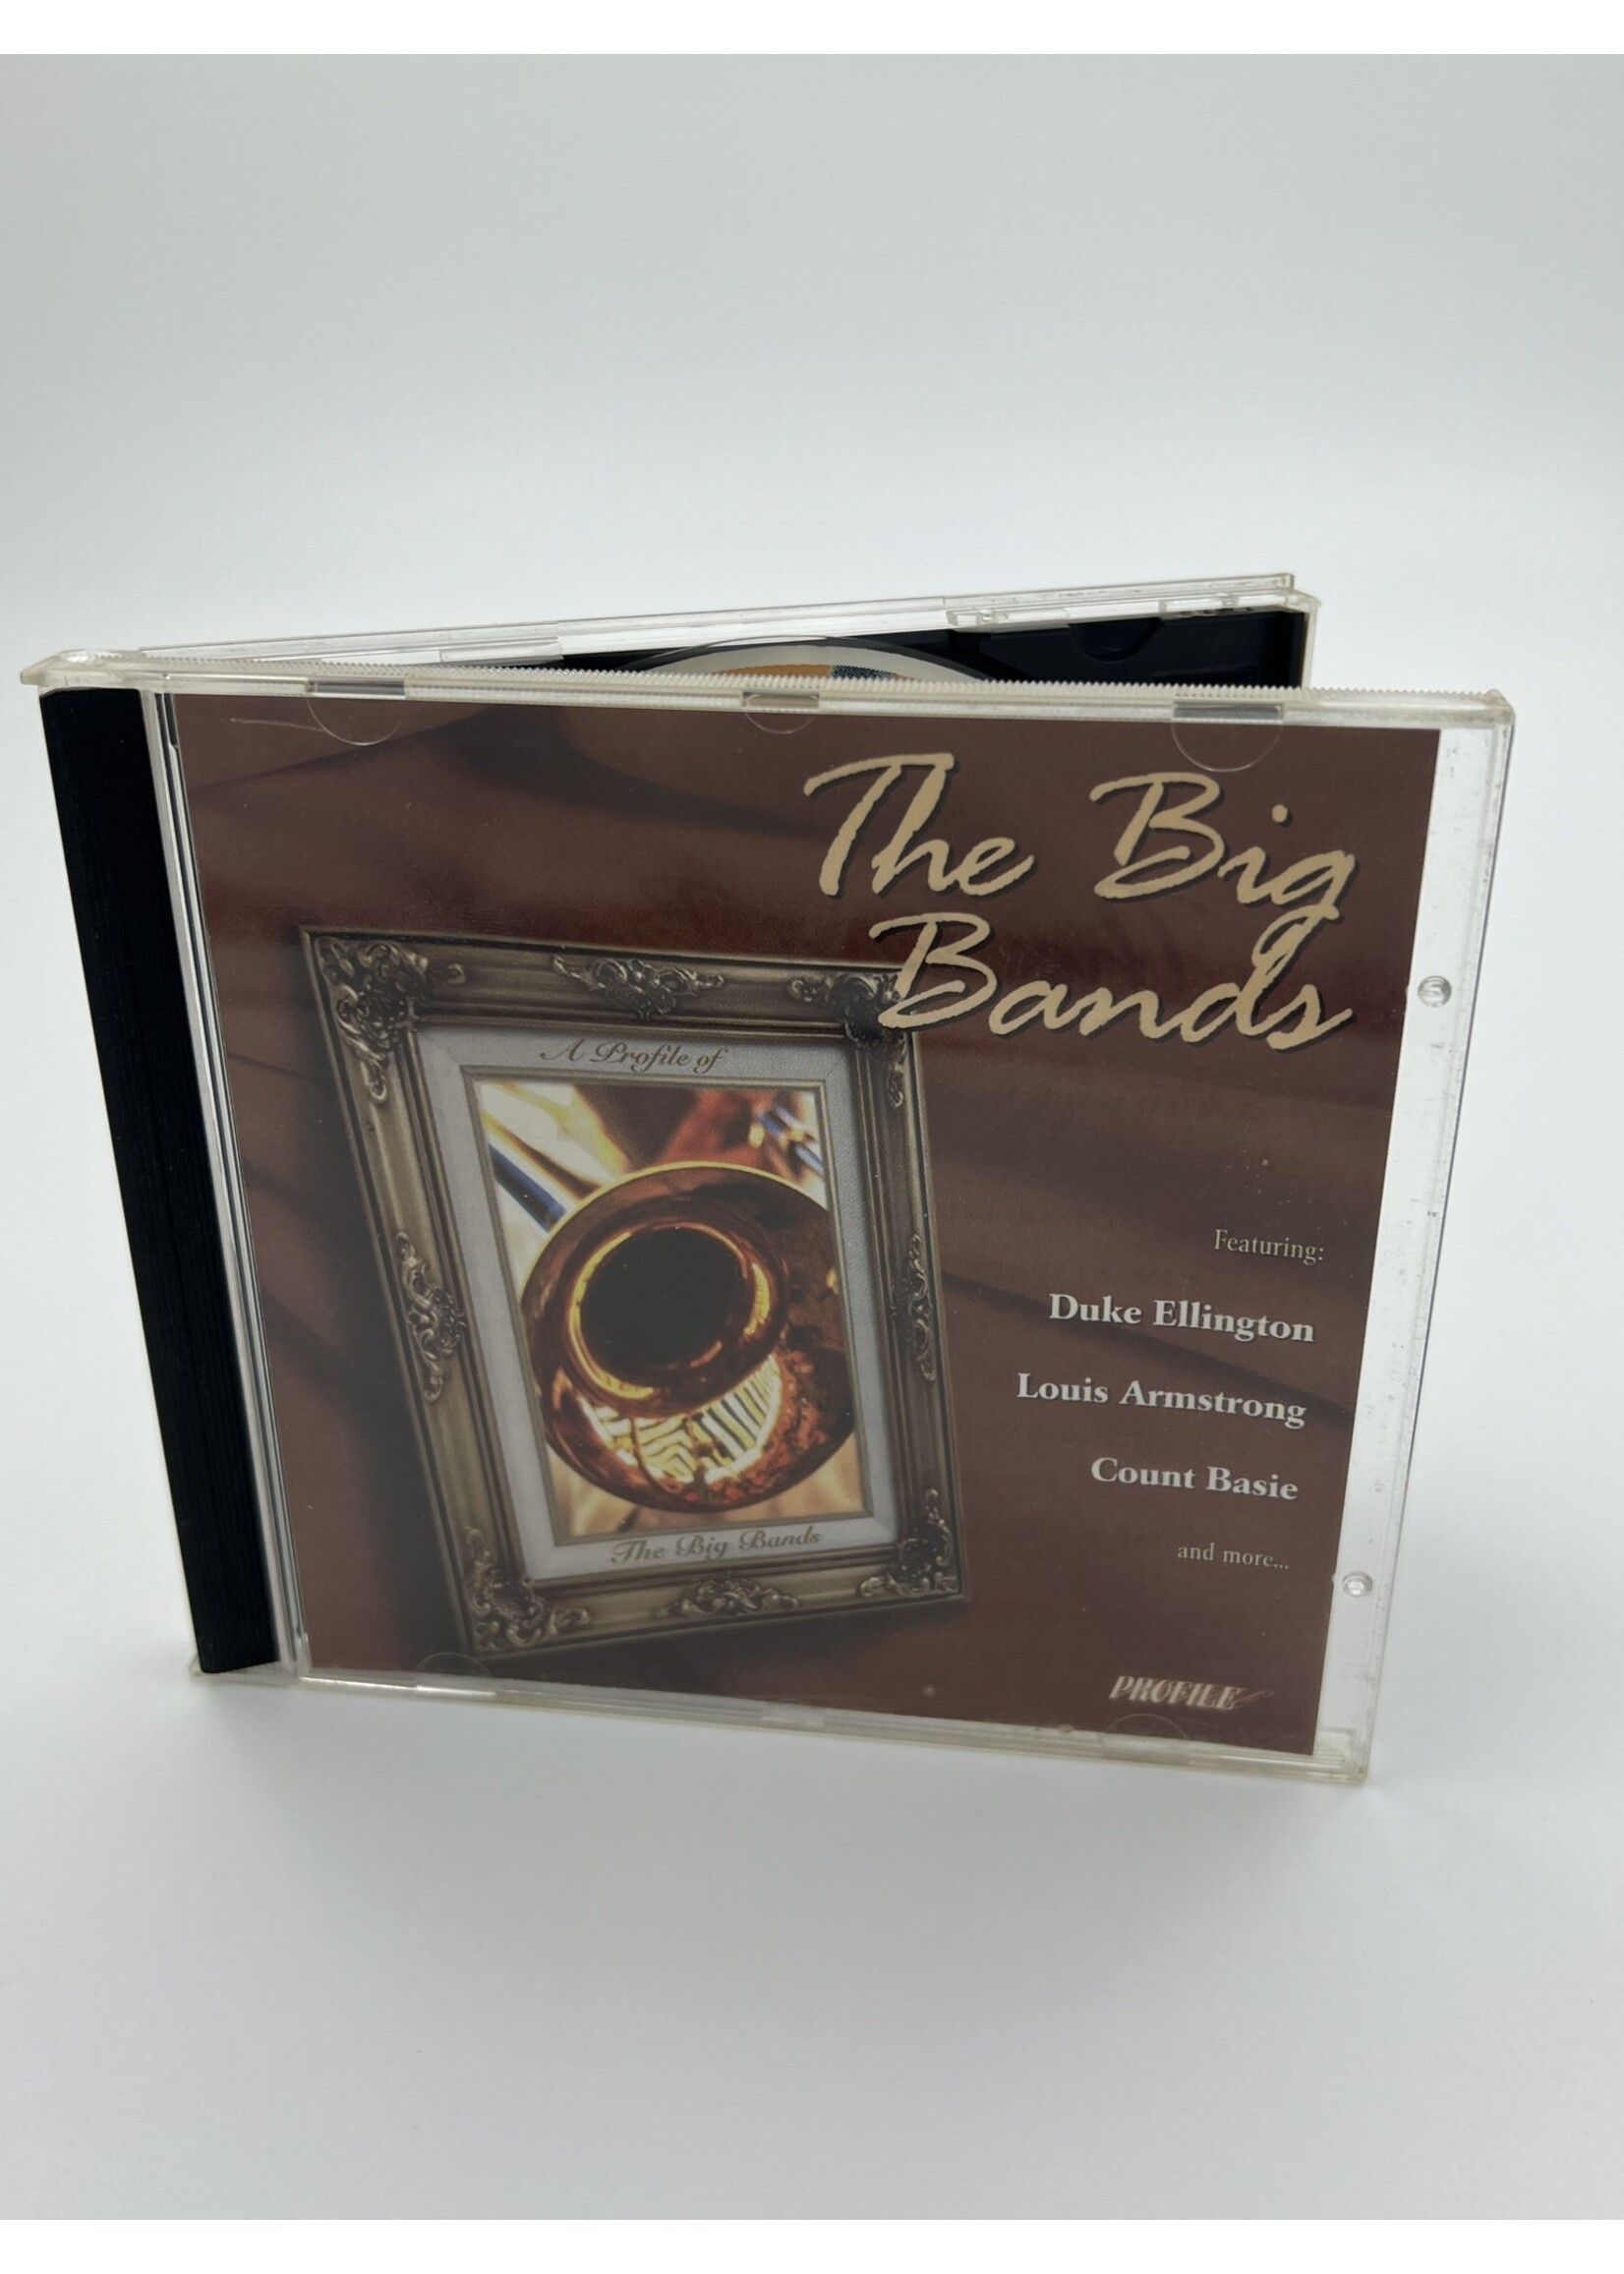 CD A Profile Of The Big Bands CD